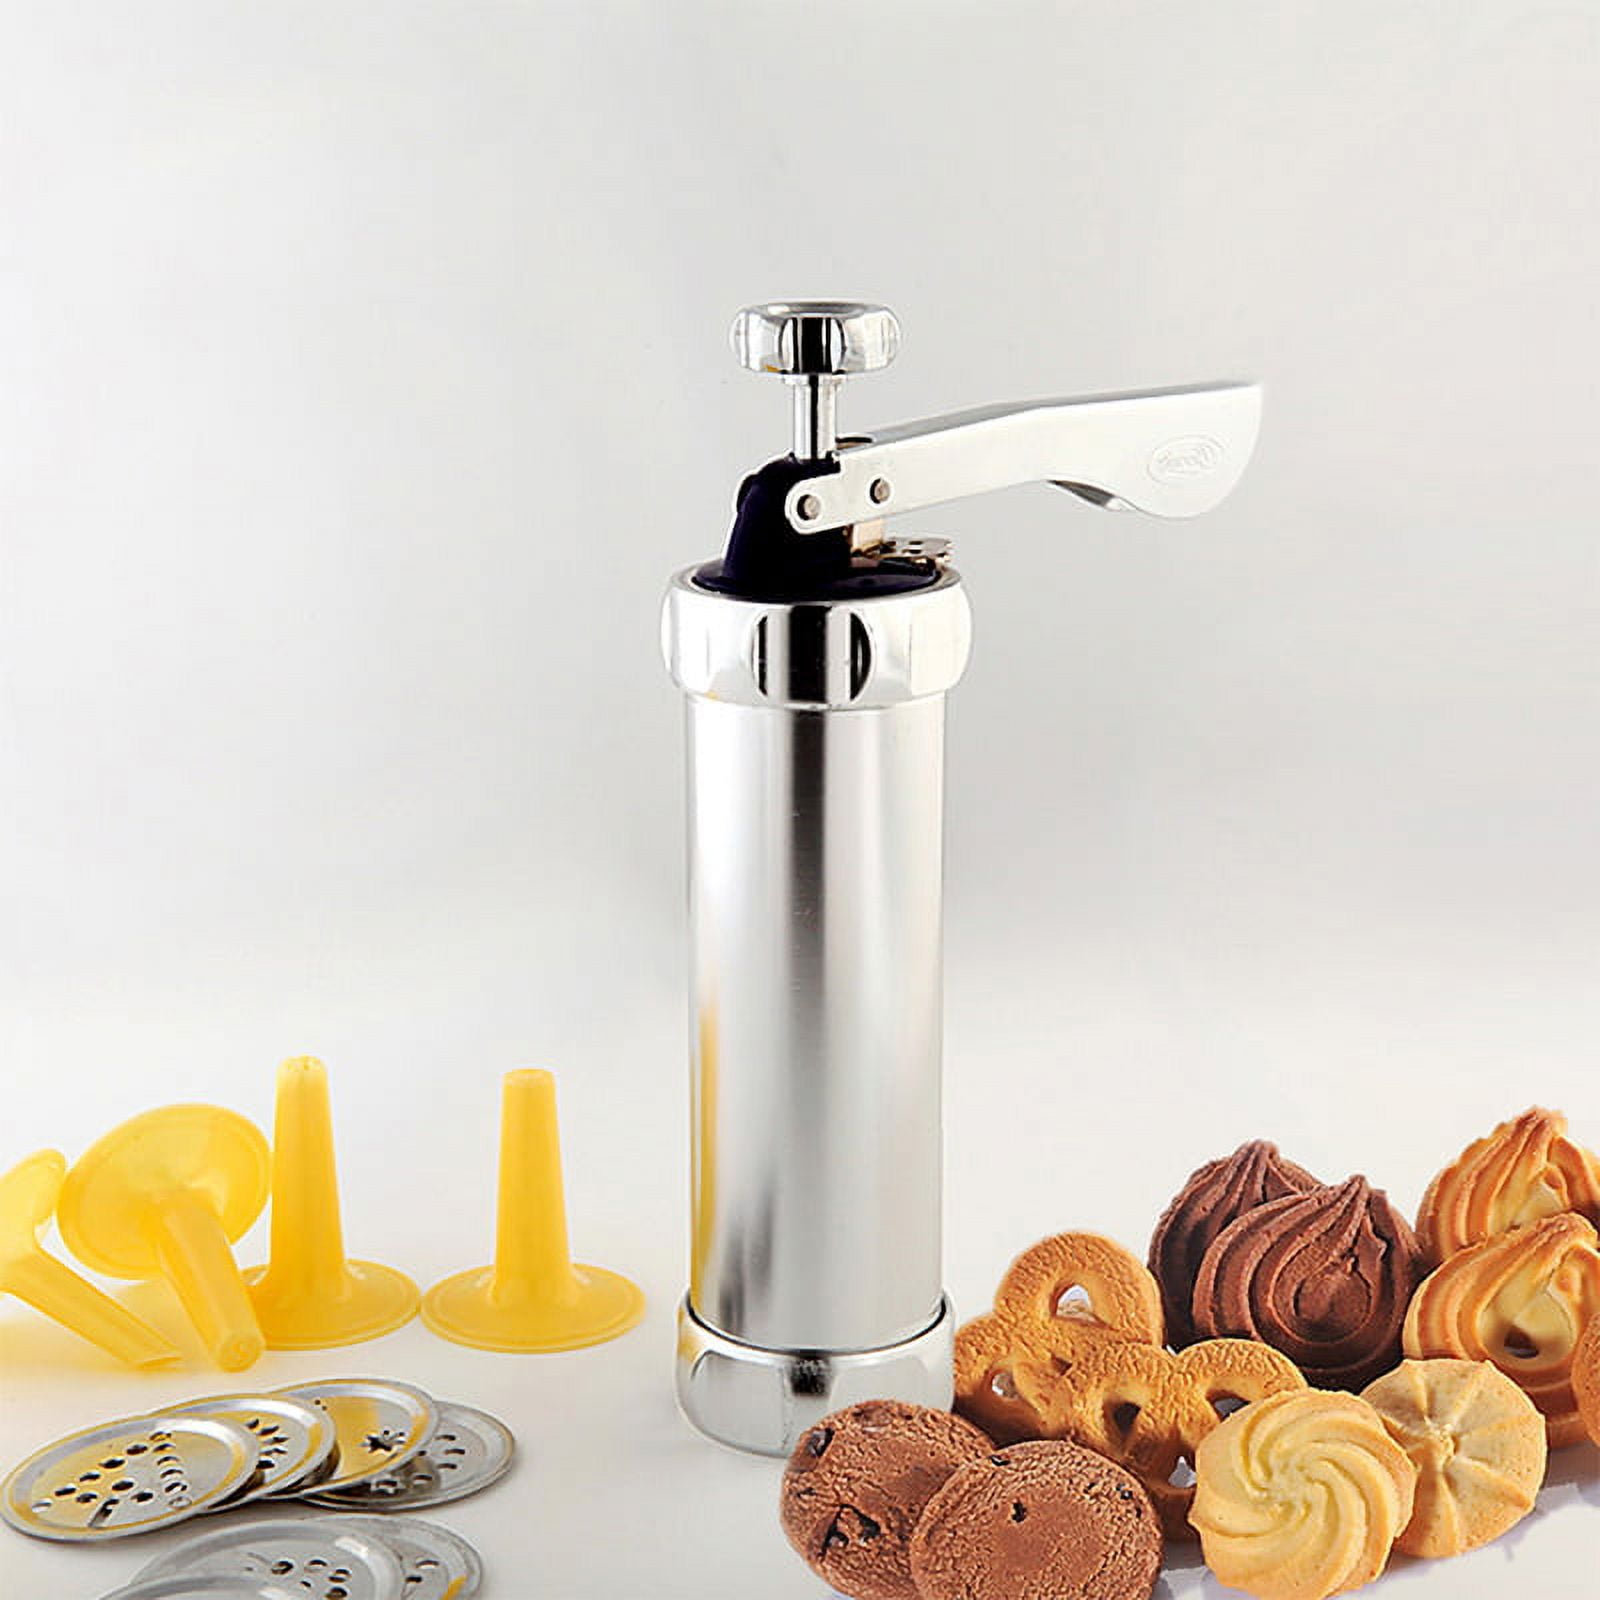 Littleduckling Cookie Press Stainless Steel Cookie Press Gun Kit Biscuit Maker and Churro Maker Cookie Press Machine with 20 Cookie Discs 4 Nozzles